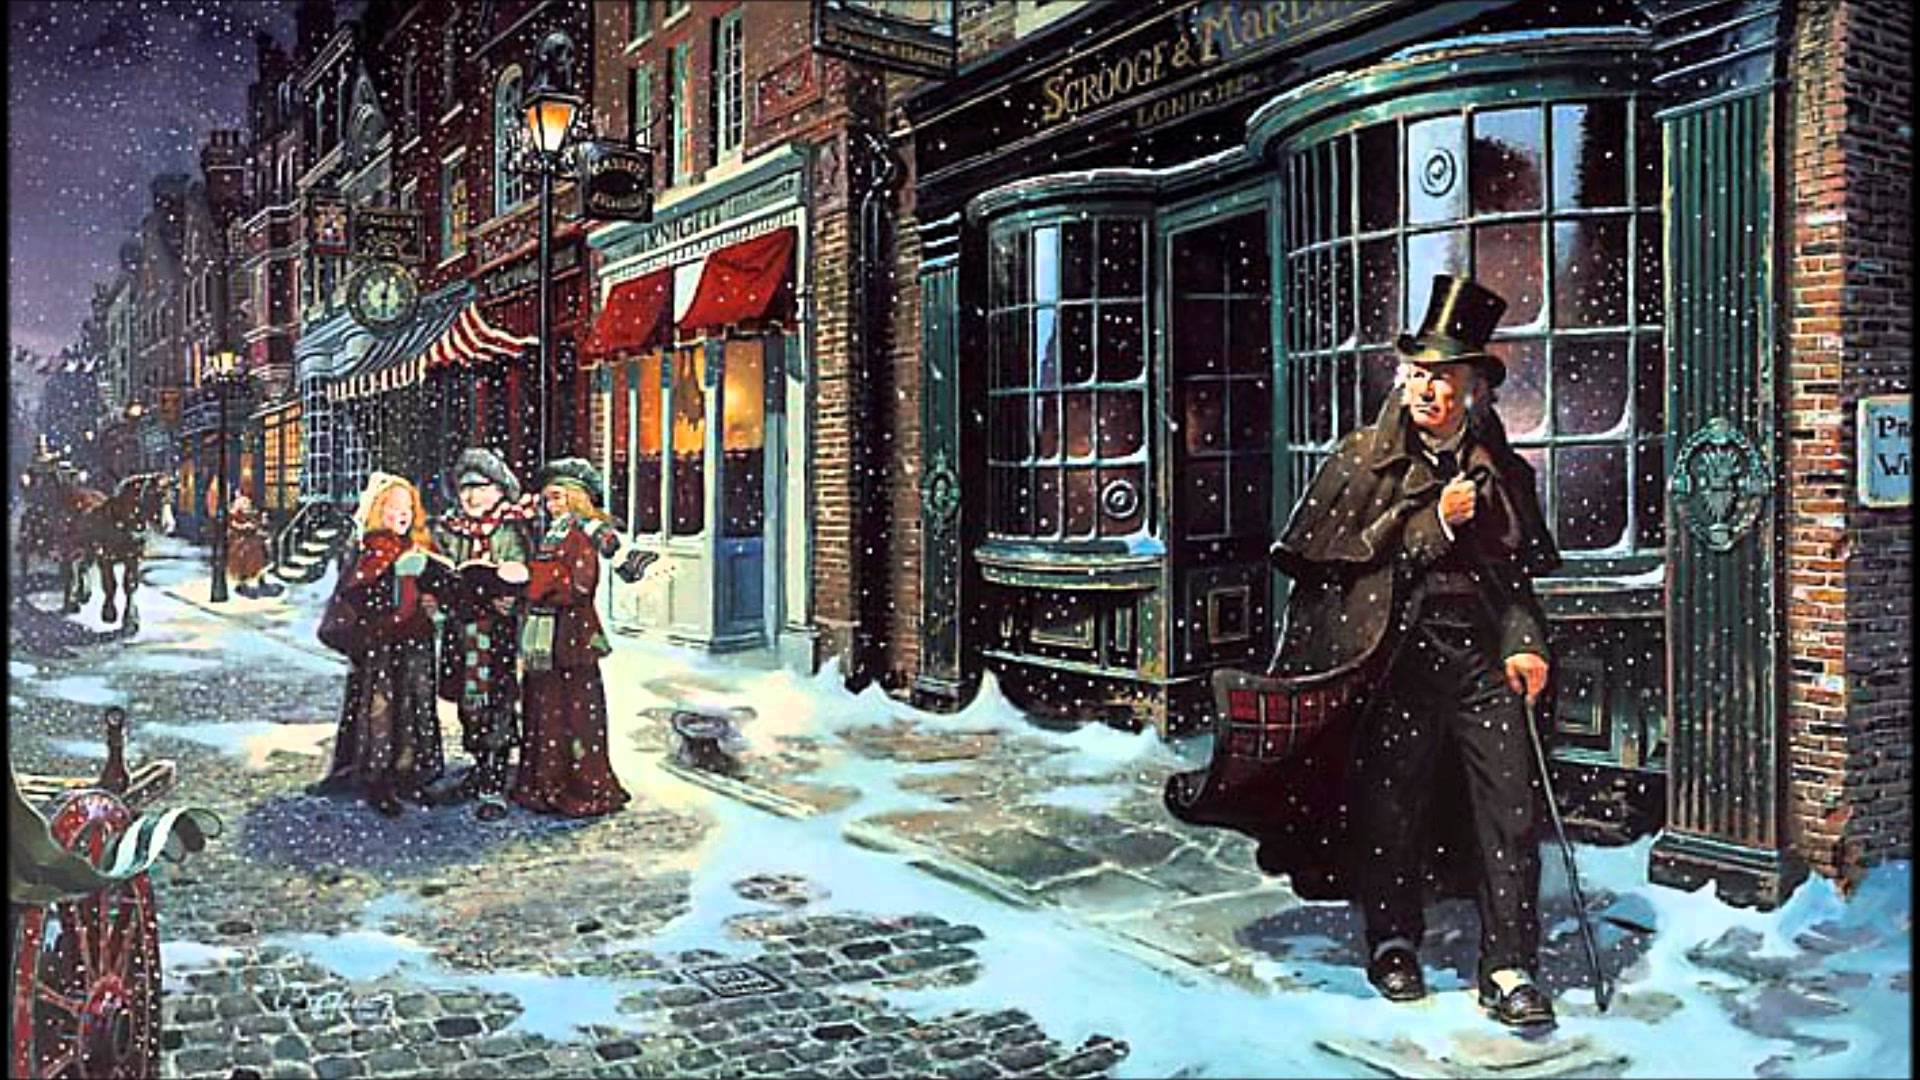 Ebenezer Scrooge- The Iconic Character From A Christmas Carol